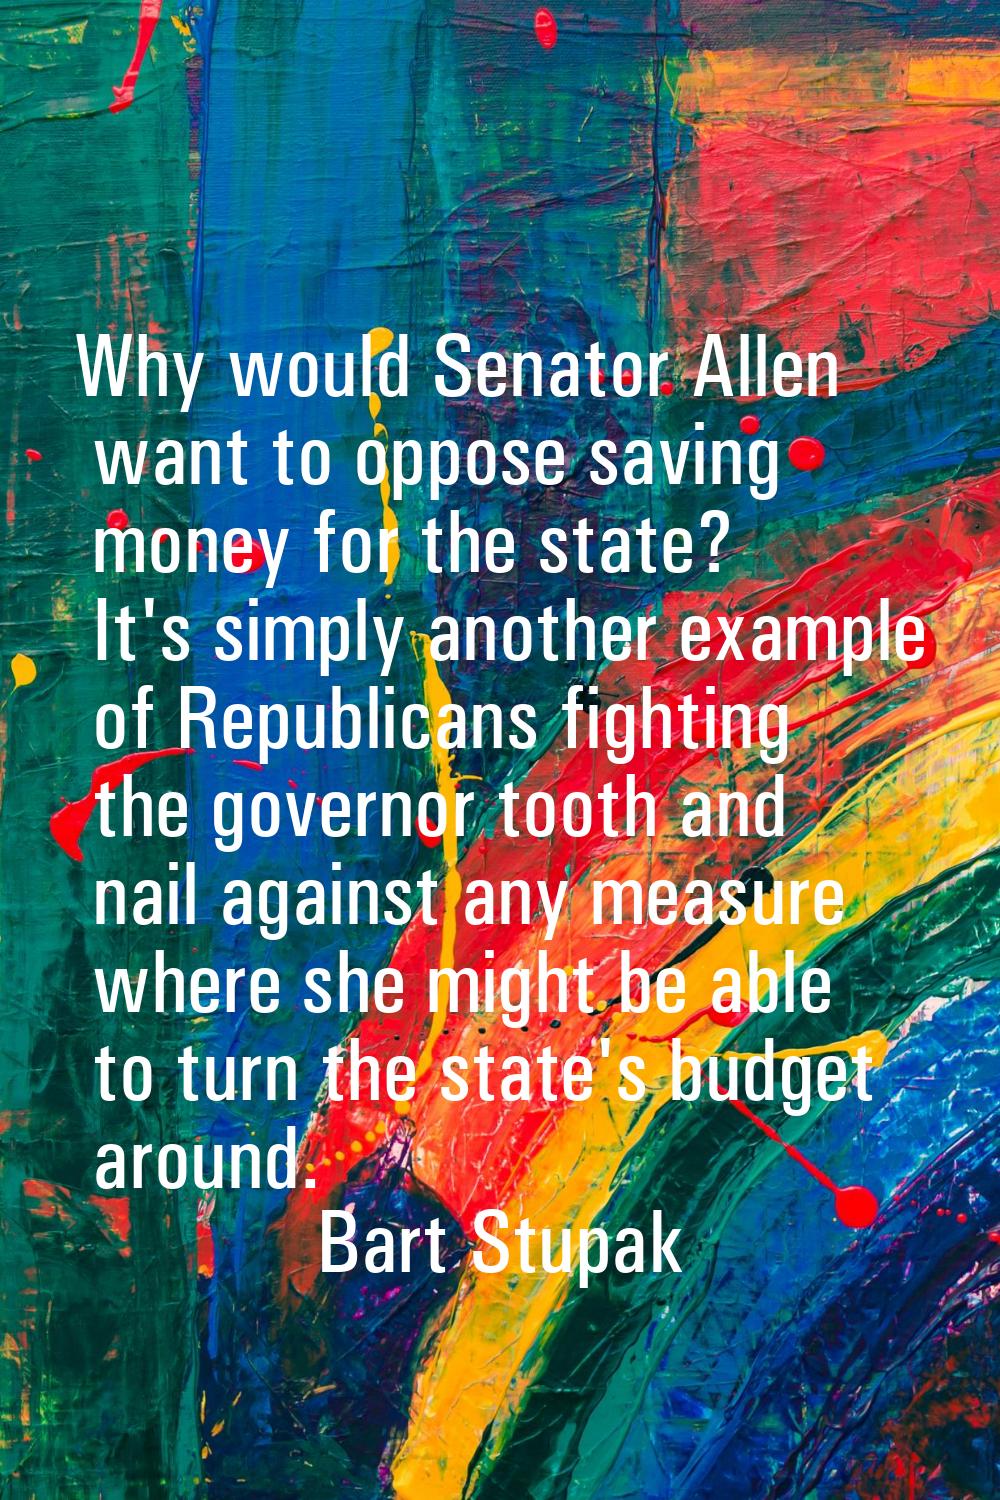 Why would Senator Allen want to oppose saving money for the state? It's simply another example of R